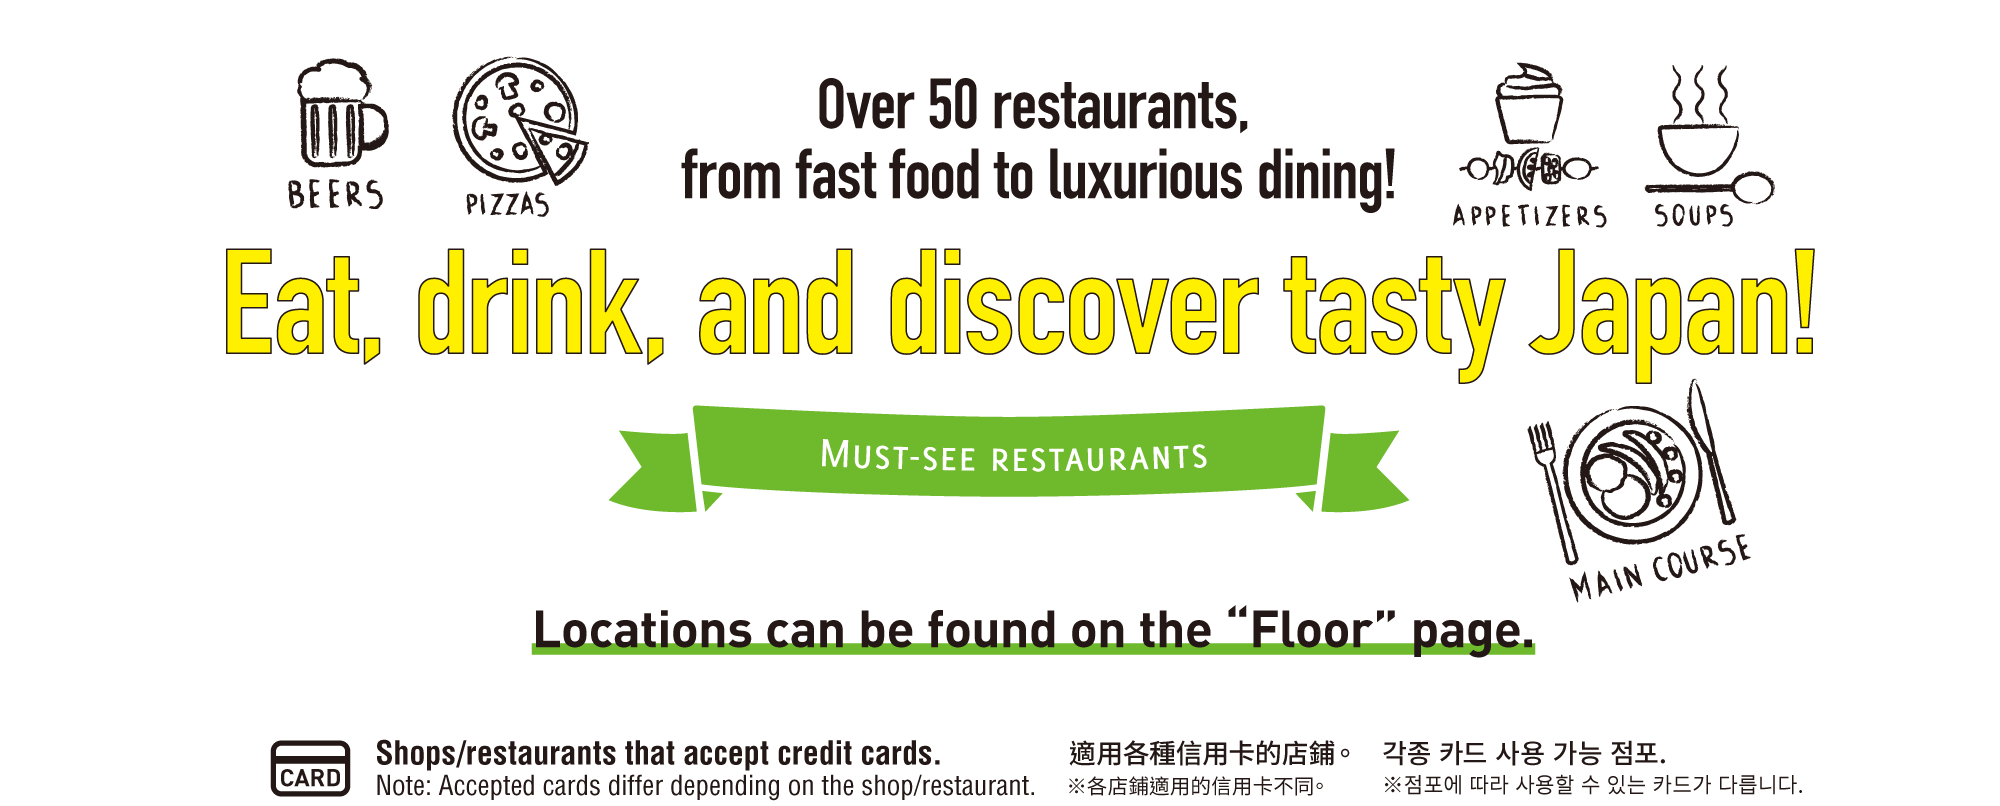 Over 50 restaurants, from fast food to luxurious dining!